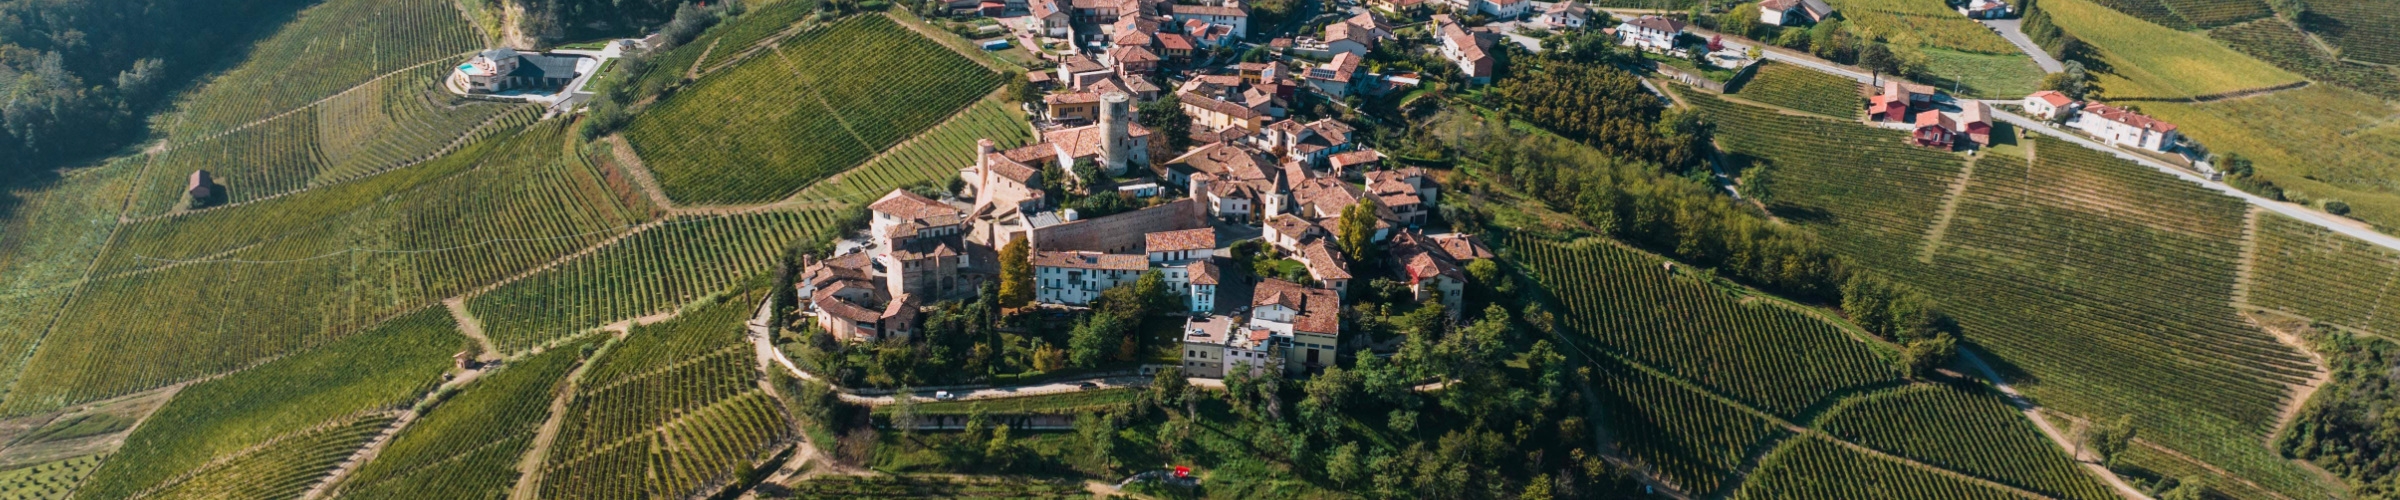 village in italy with vineyards surrounding